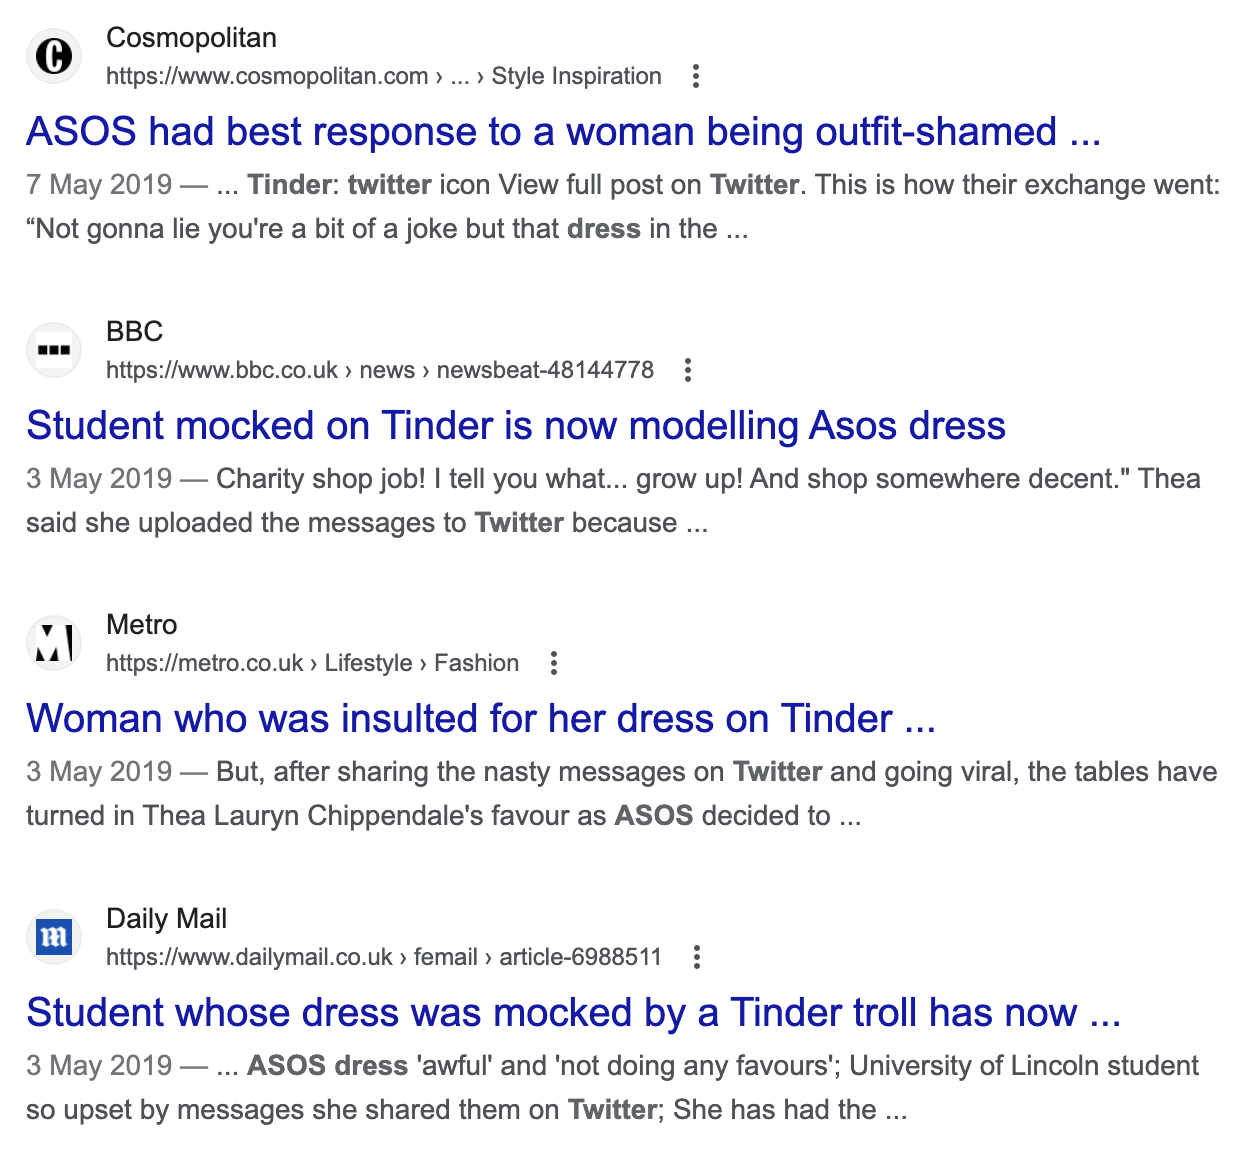 Google SERP featuring news about Thea and ASOS story